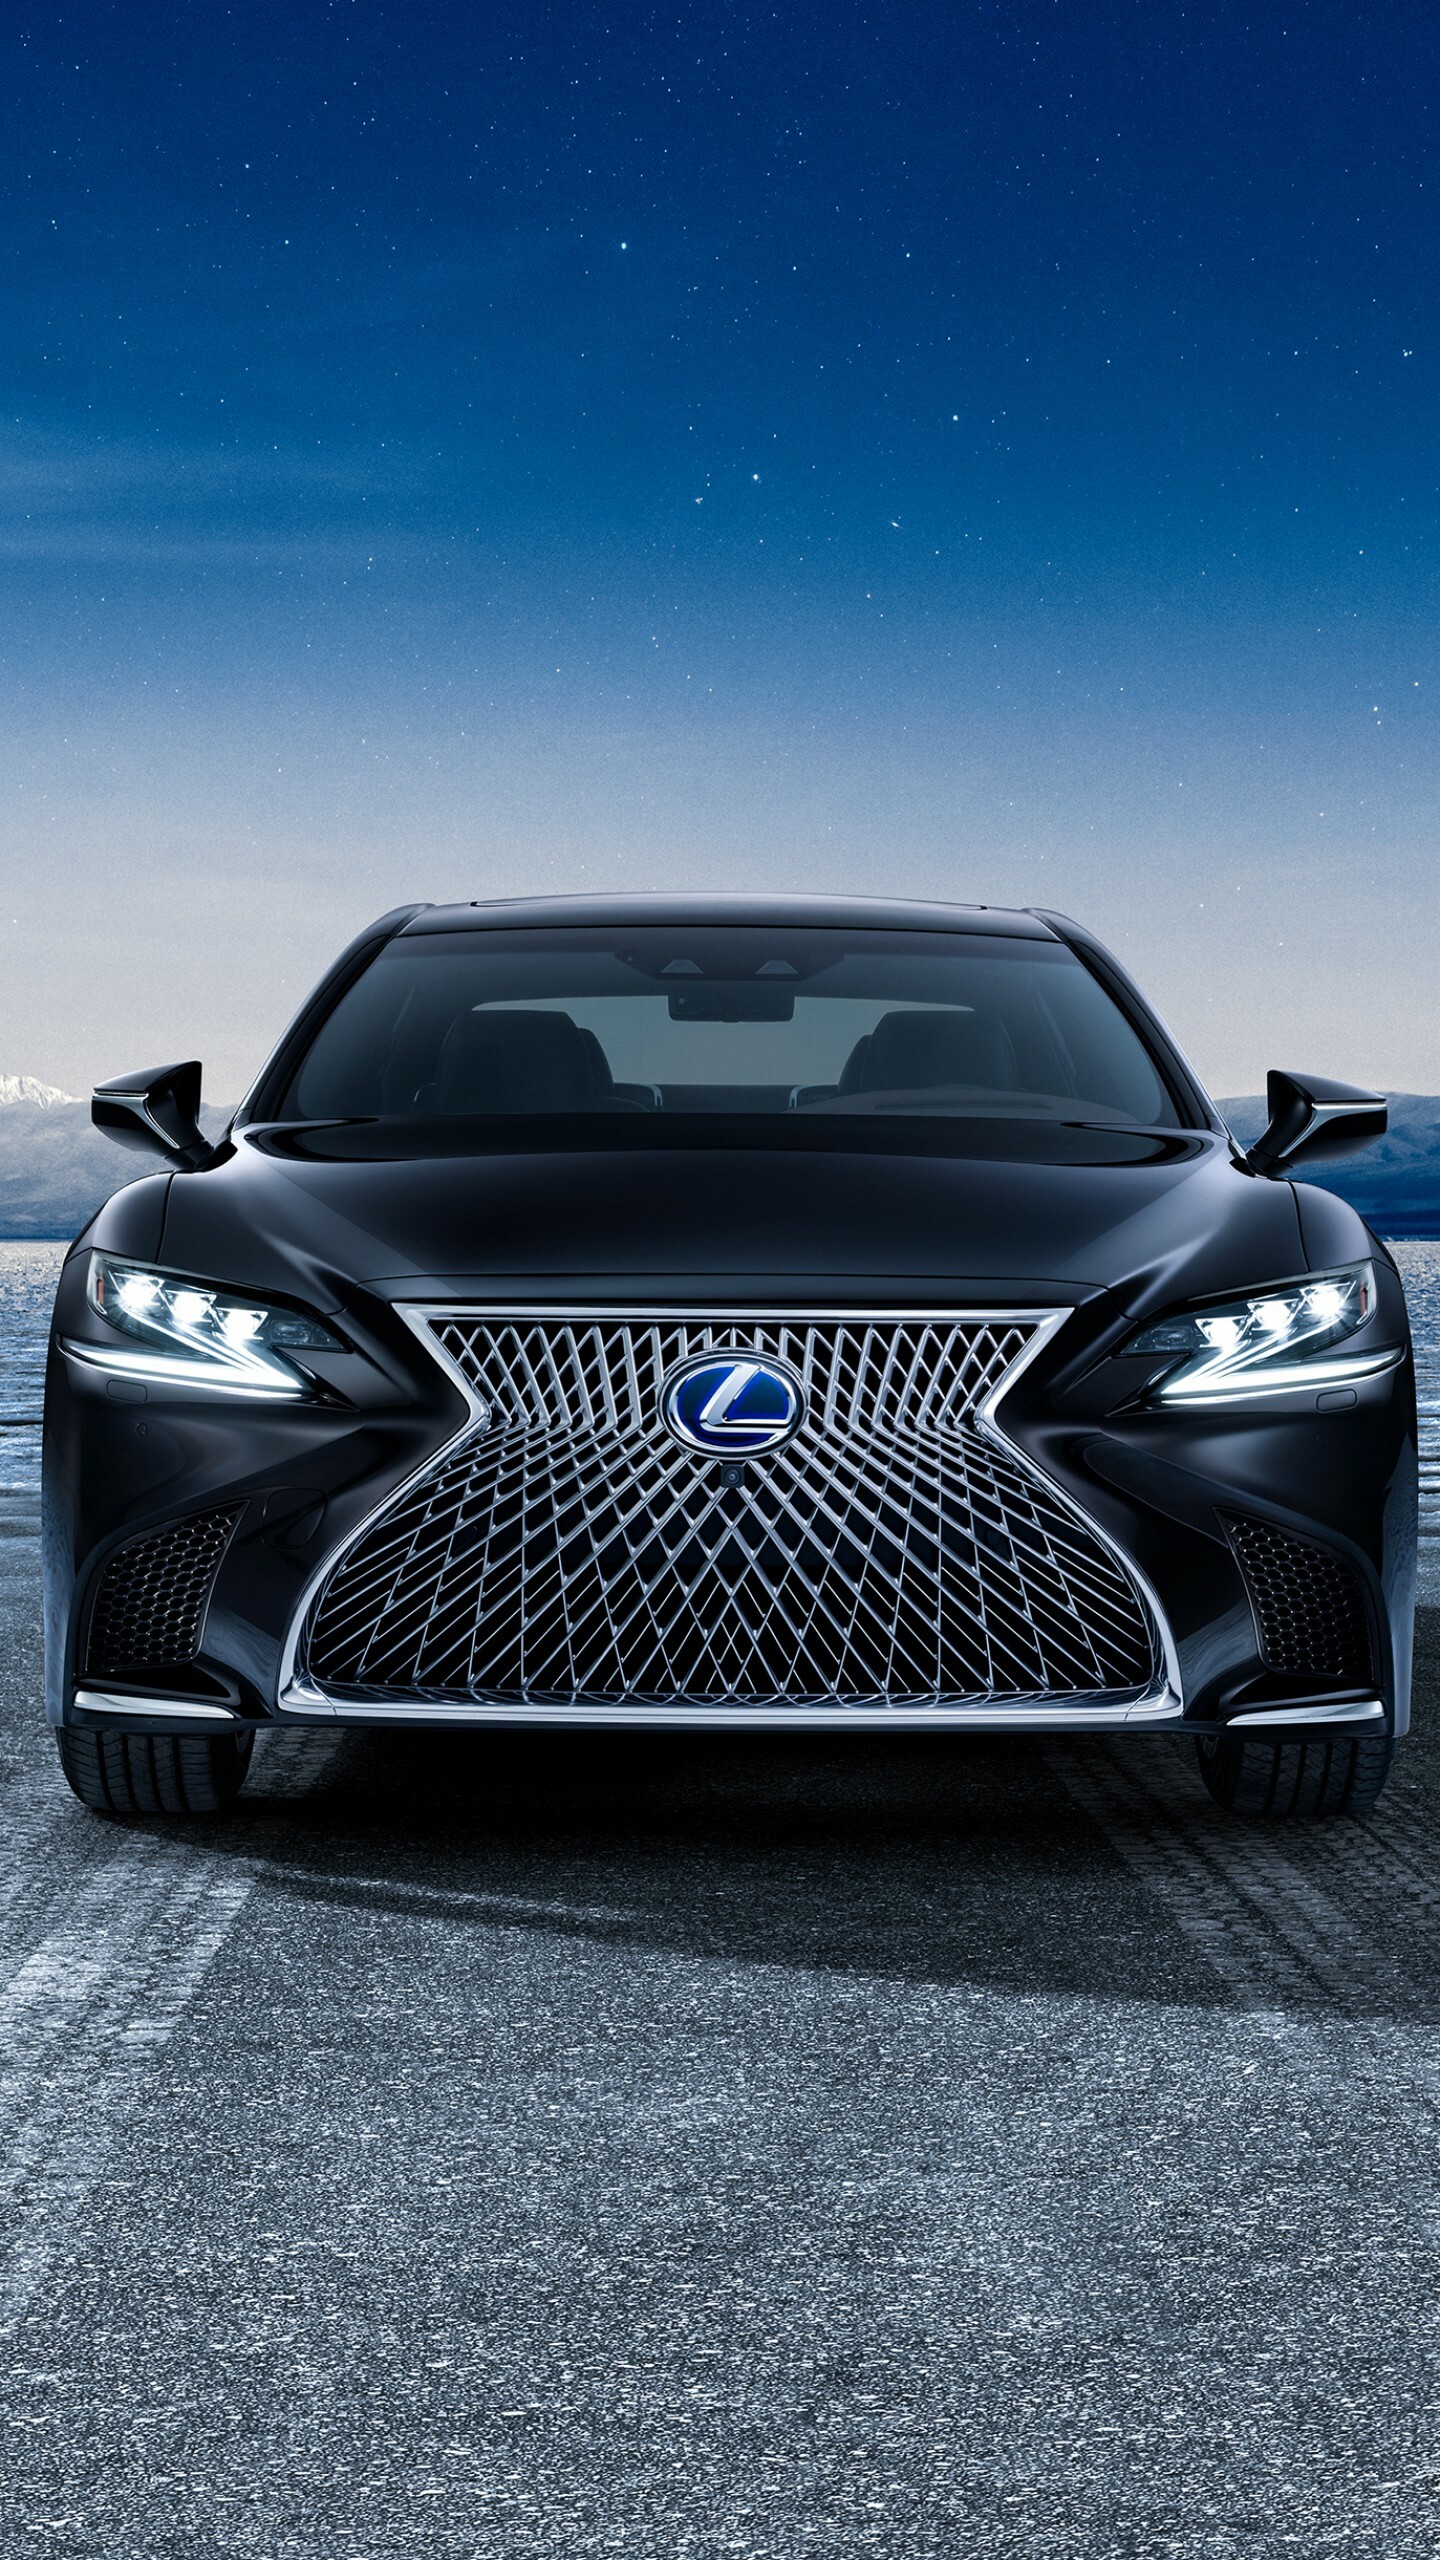 Lexus: Japanese automaker, The global lineup features sedans of different size classes, Spindle grille. 1440x2560 HD Wallpaper.